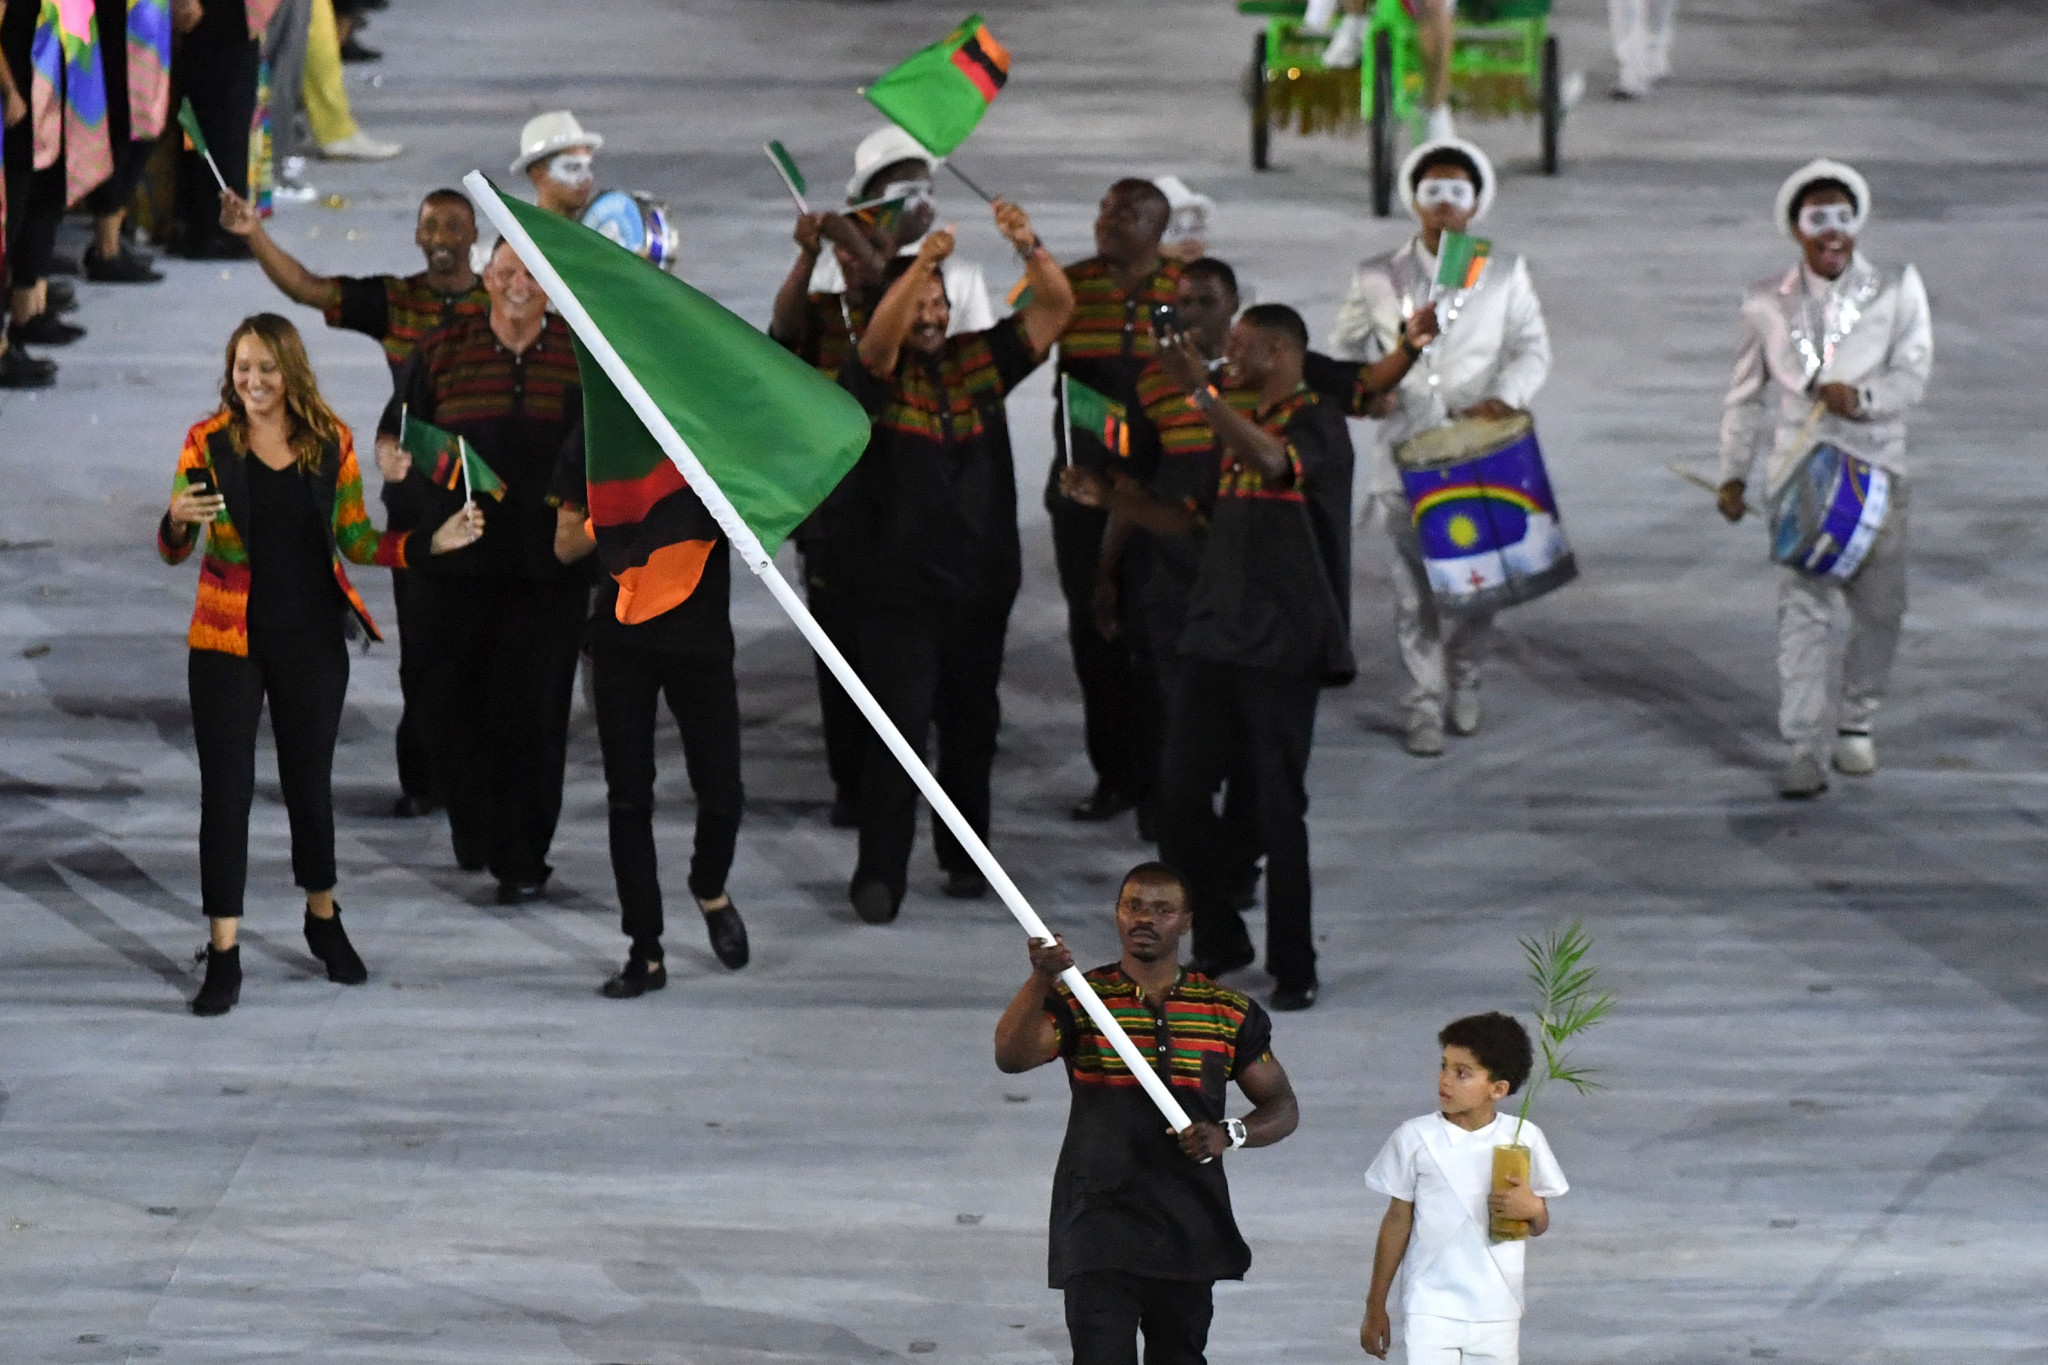 Zambian Chef de Mission warns officials will need to be "guards" for Tokyo 2020 athletes